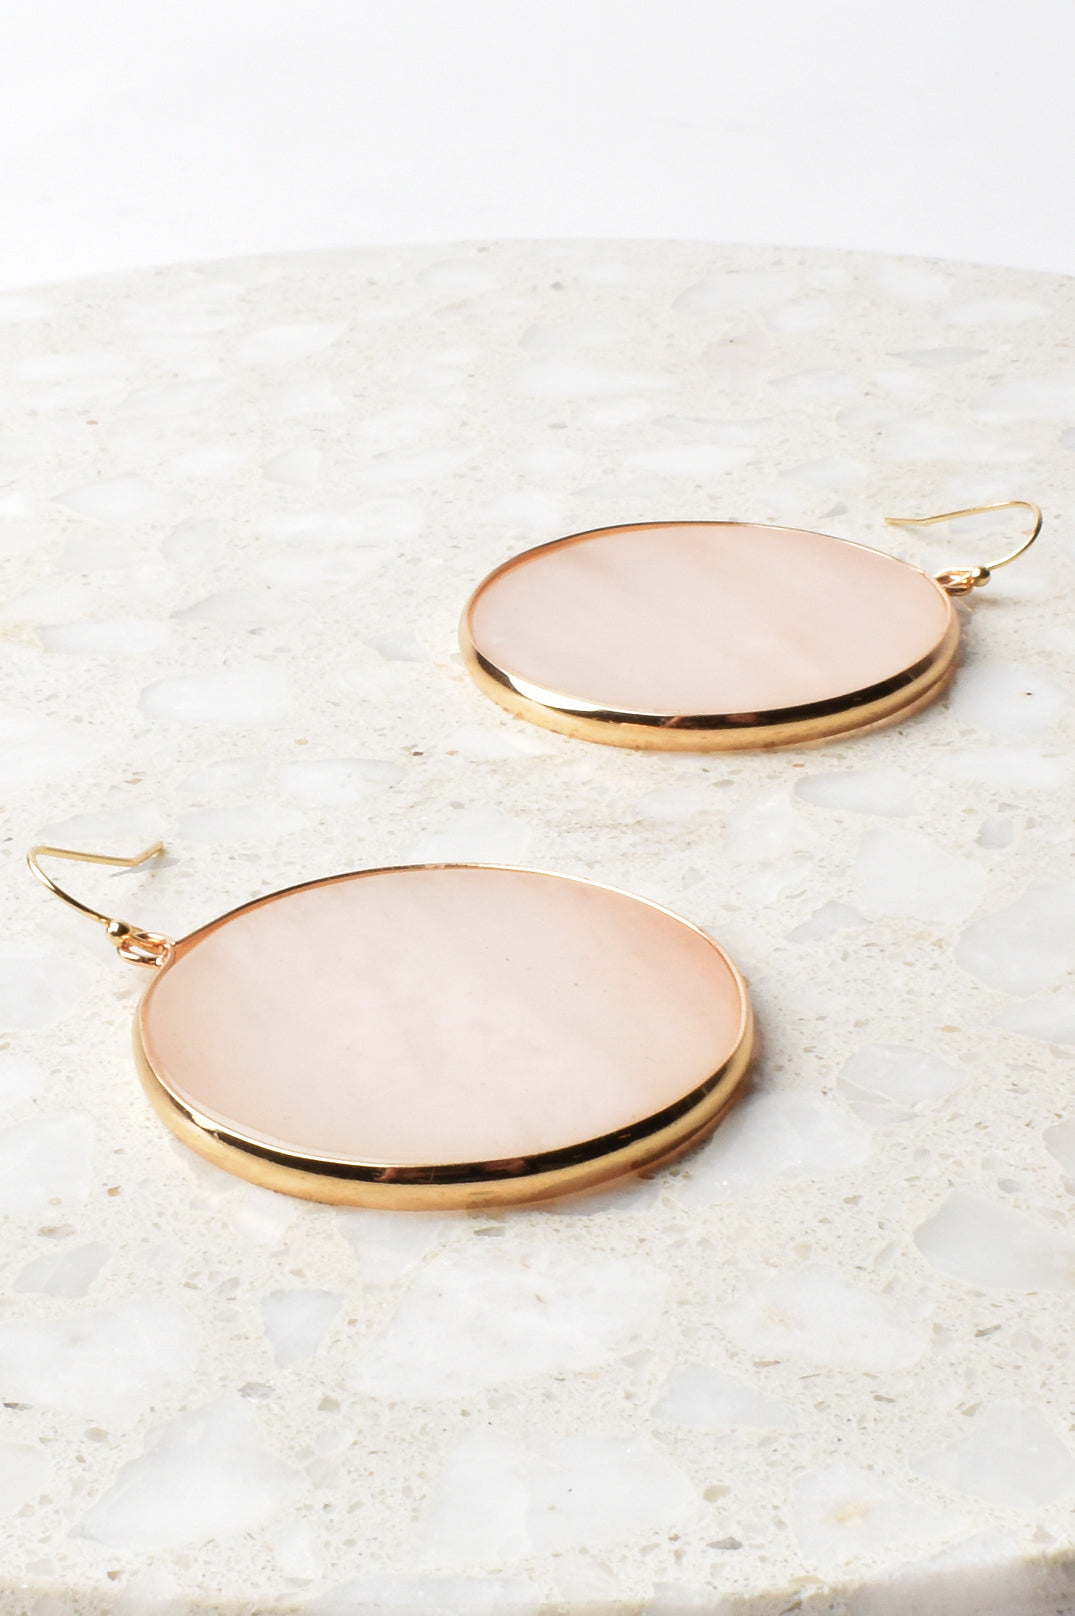 Adorne - Round Disc Fashion Earrings in Black and Silver and Peach and Gold - sammi